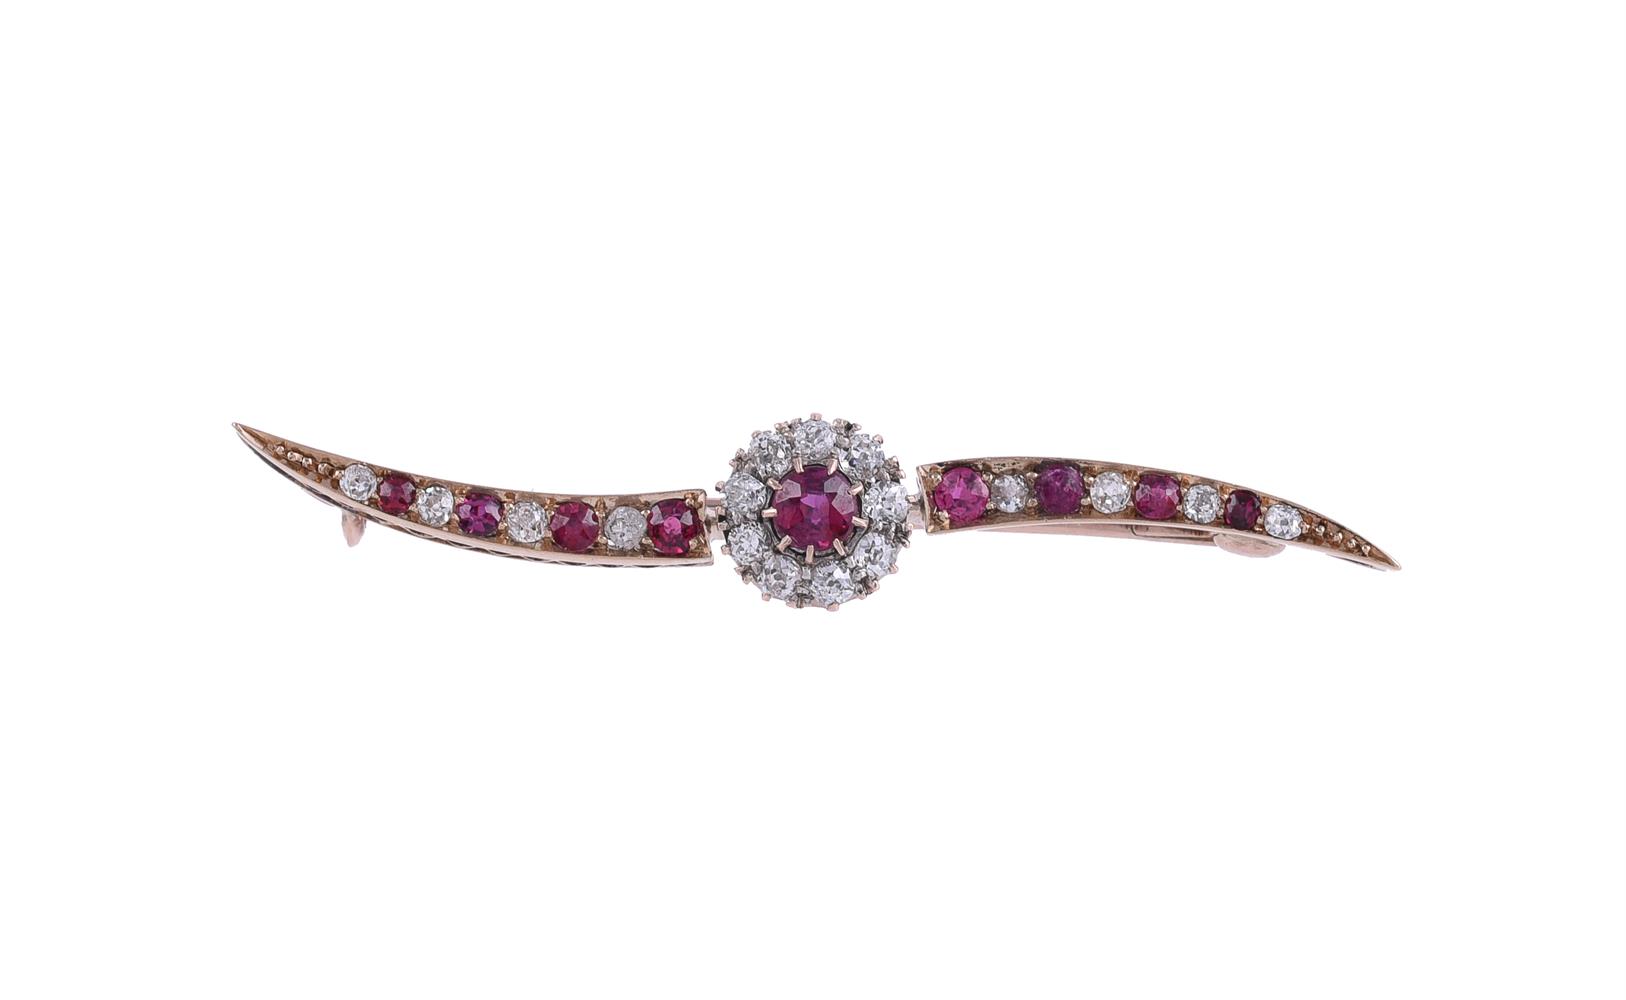 A LATE VICTORIAN RUBY AND DIAMOND BROOCH CIRCA 1890